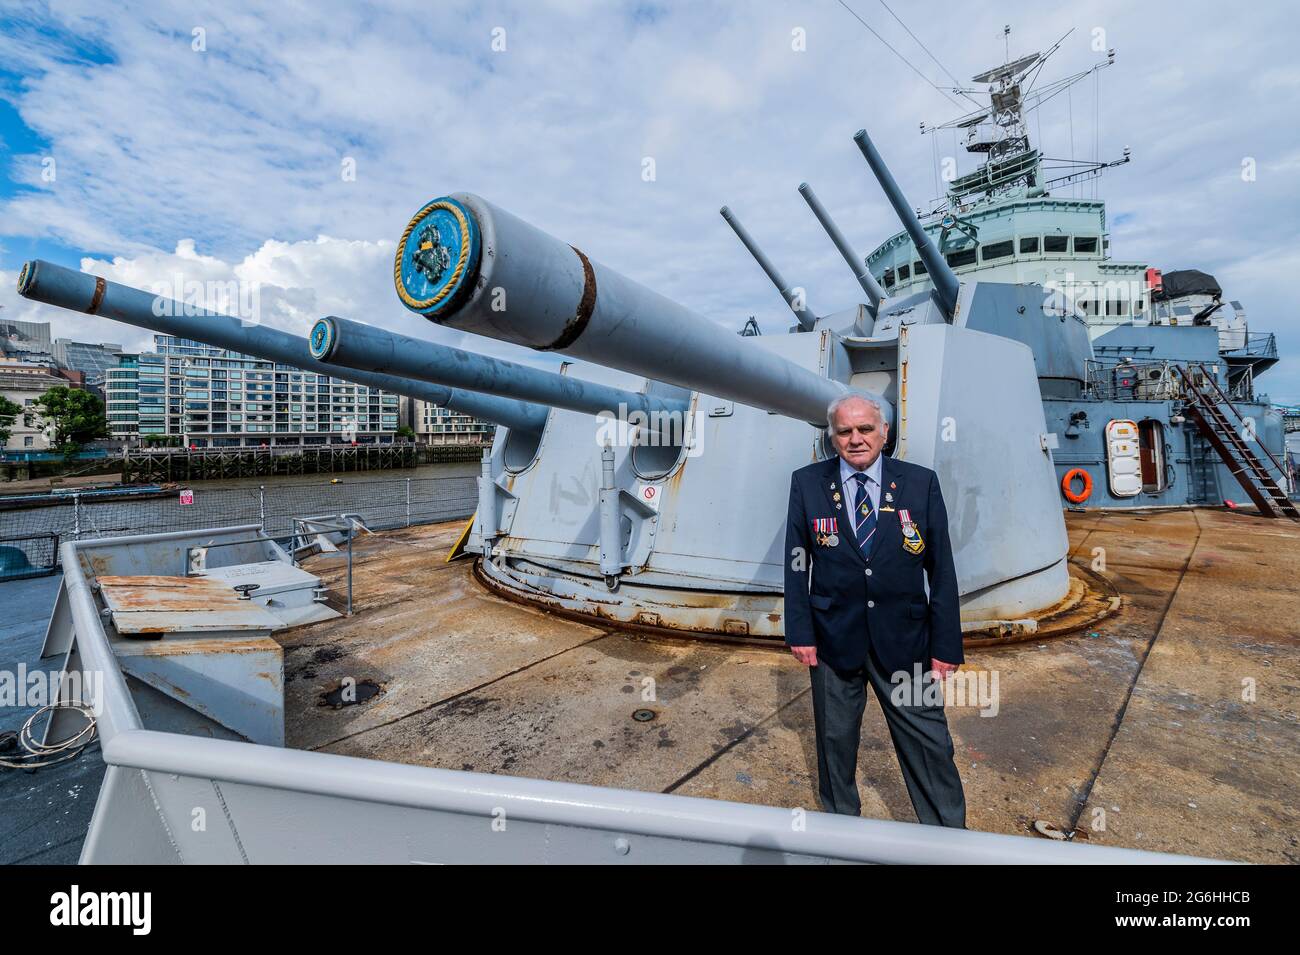 London, UK. 6th July, 2021. In front of the main guns - Bernie Bristoll a  radio operator and Chief petty Officer in the Royal Navy, served on the  ship for 2 years.